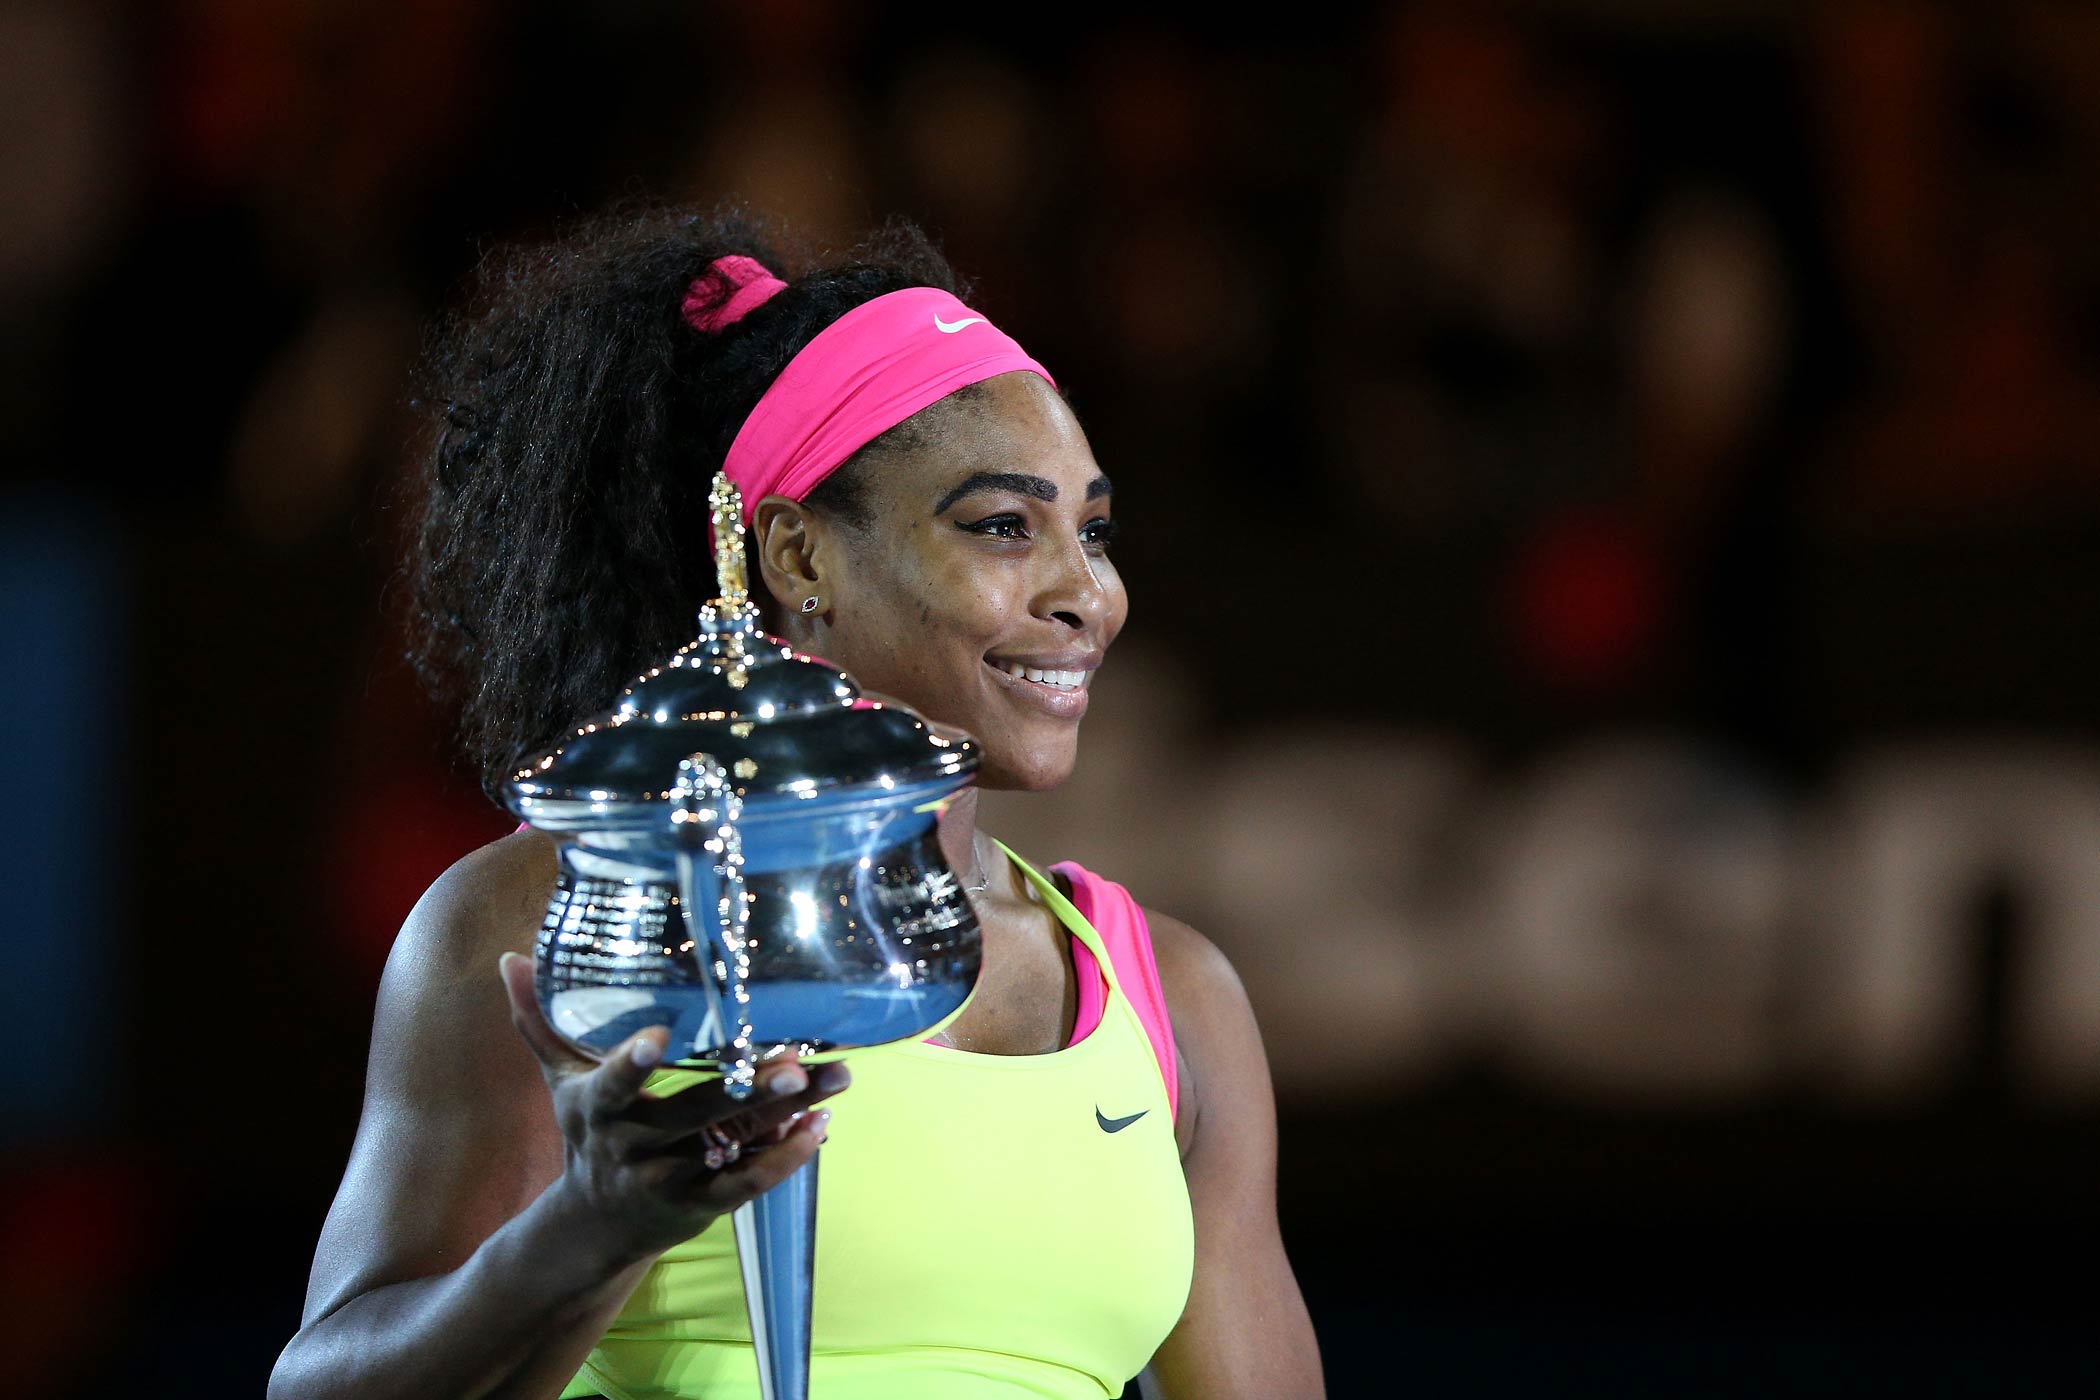 Serena Williams holds the Daphne Akhurst Memorial Cup after winning the women's final match against Maria Sharapova at the Australian Open on Jan. 31, 2015 in Melbourne, Australia. (Hannah Peters—Getty Images)